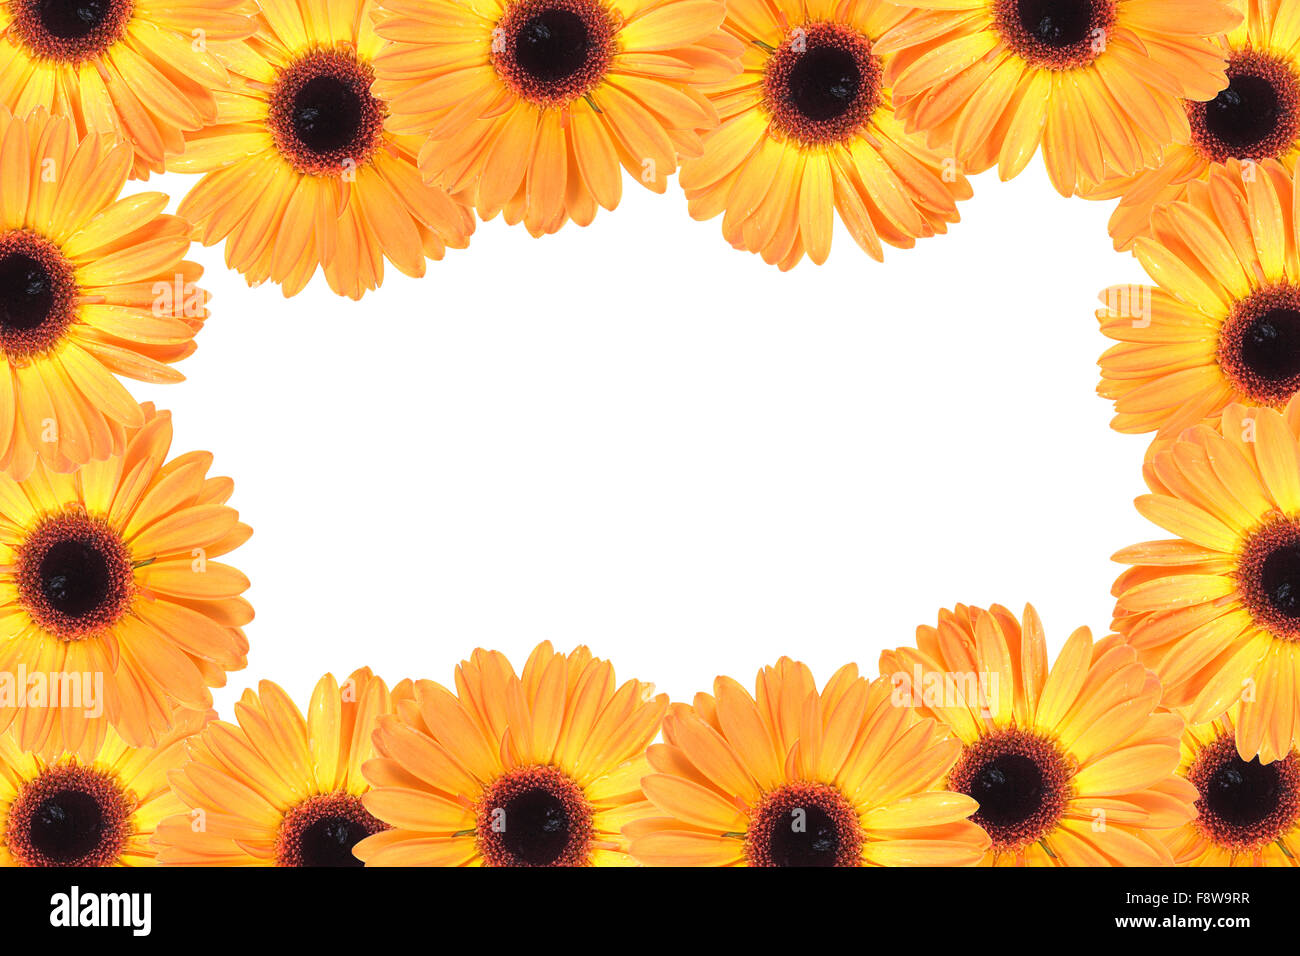 Abstract frame with orange flowers Stock Photo